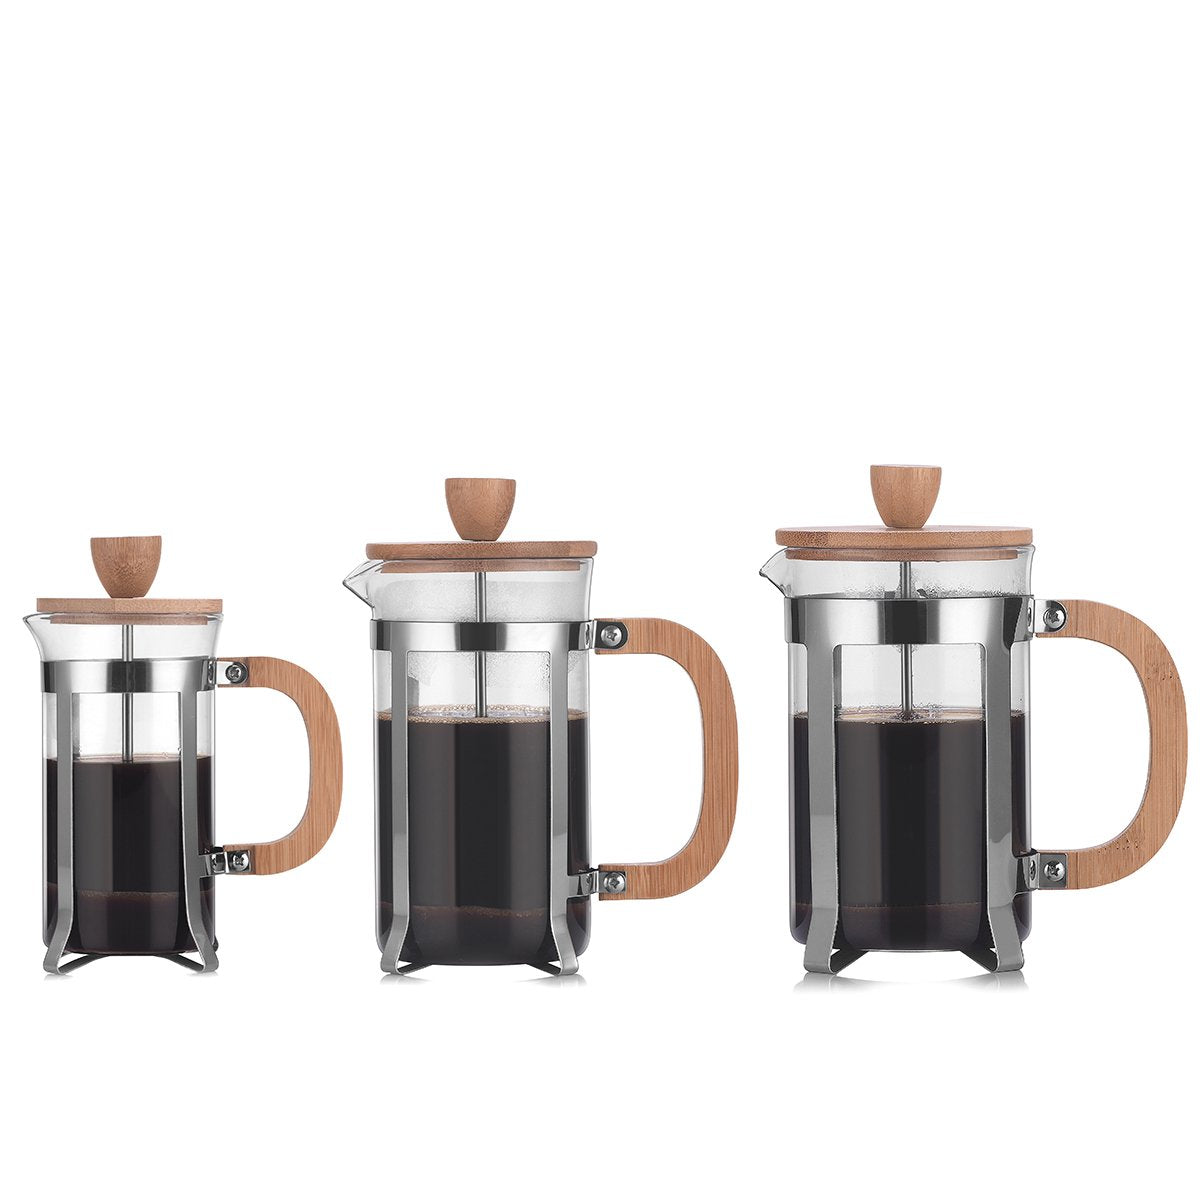 SUGIFT 4 Cup French Press Chrome Coffee Maker